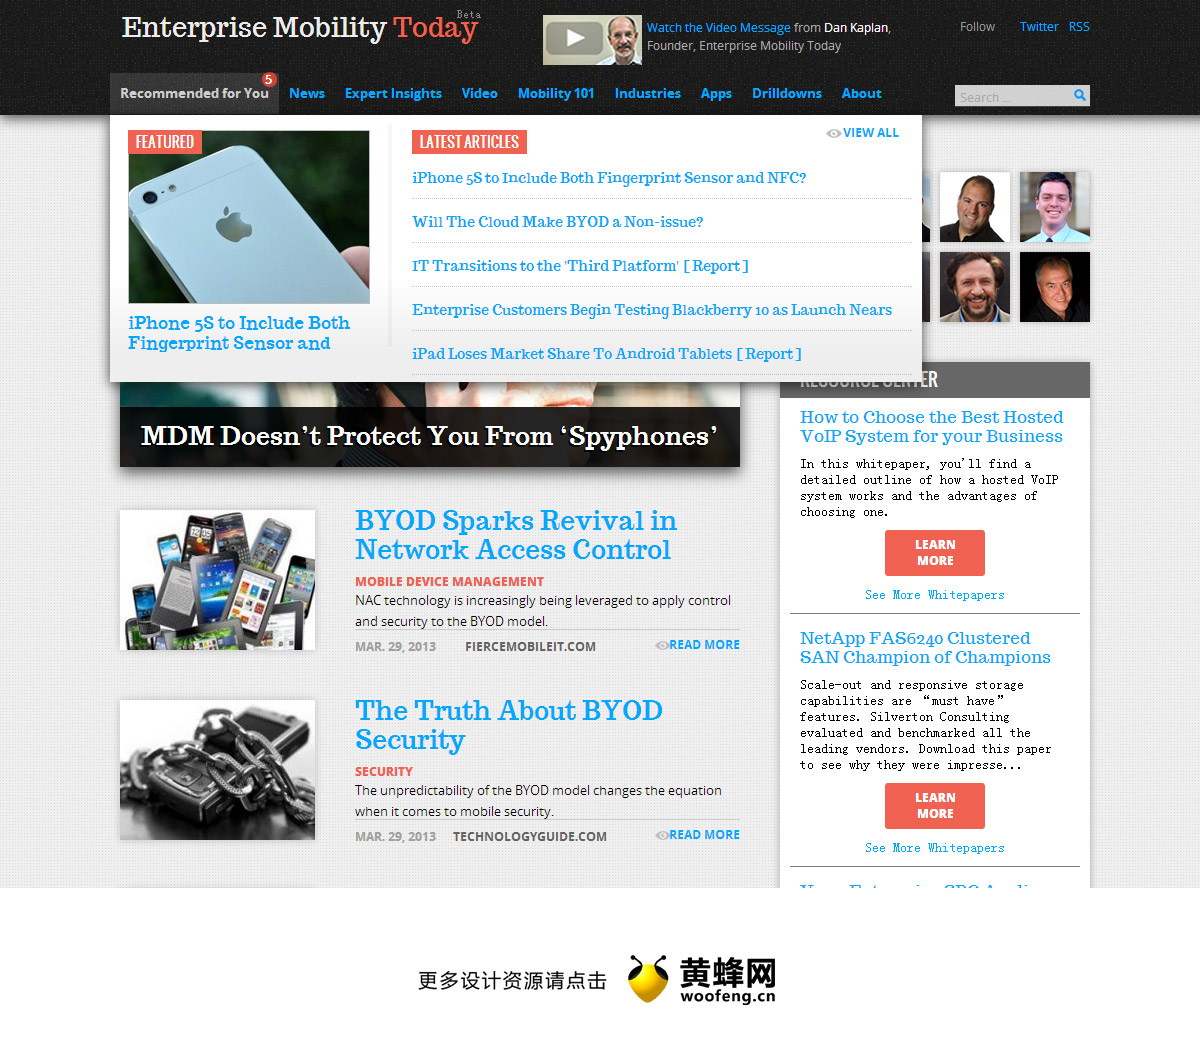 Enterprise Mobility Today网站导航设计，来源自黄蜂网https://woofeng.cn/web/